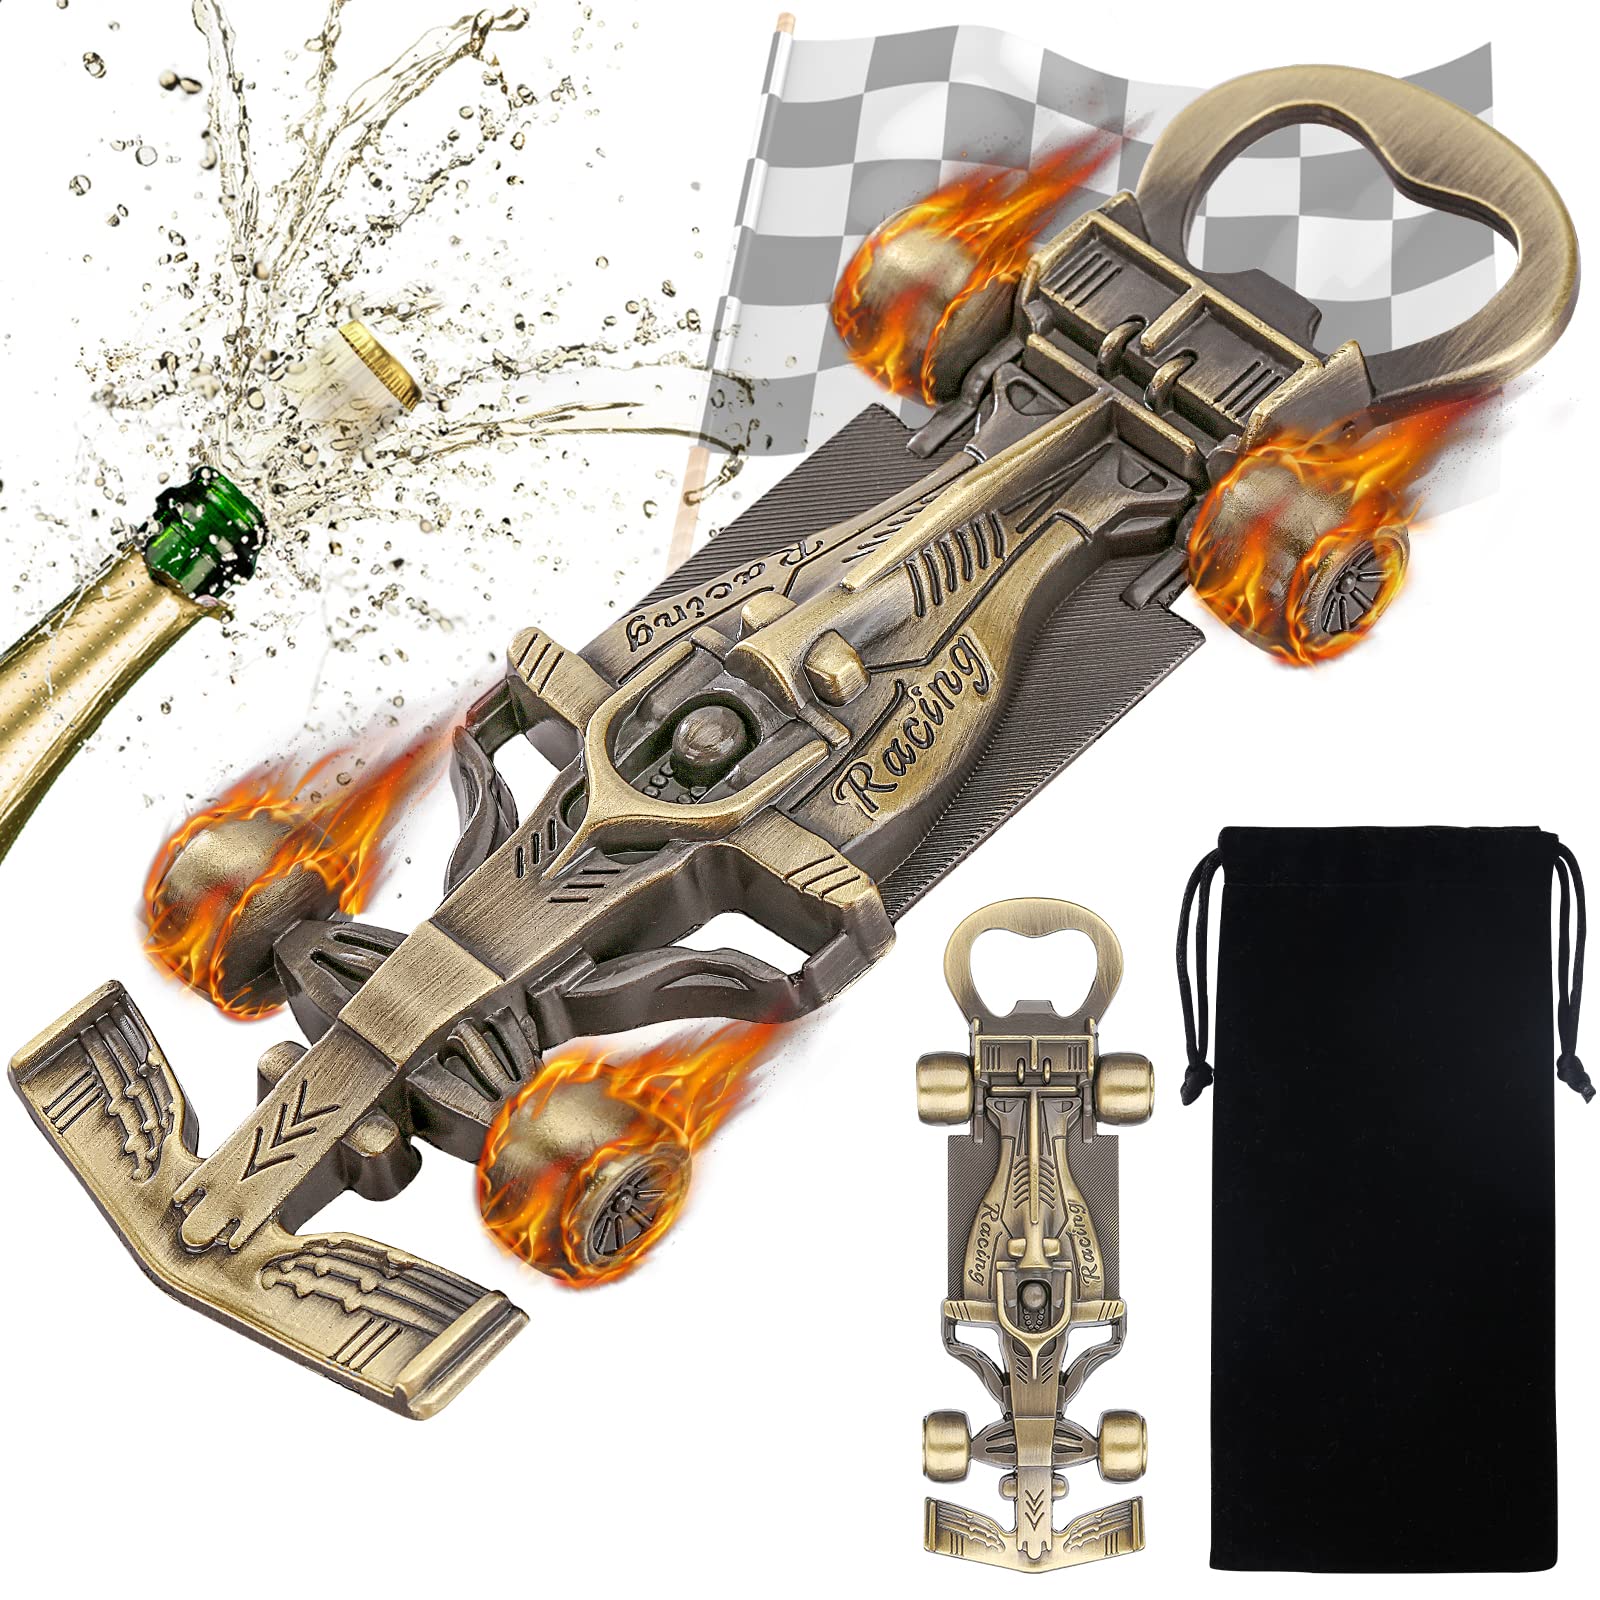 LKKcHER Racing car gifts for Men Women, Novelty Racing car Bottle Opener,  Birthday gifts christmas gifts